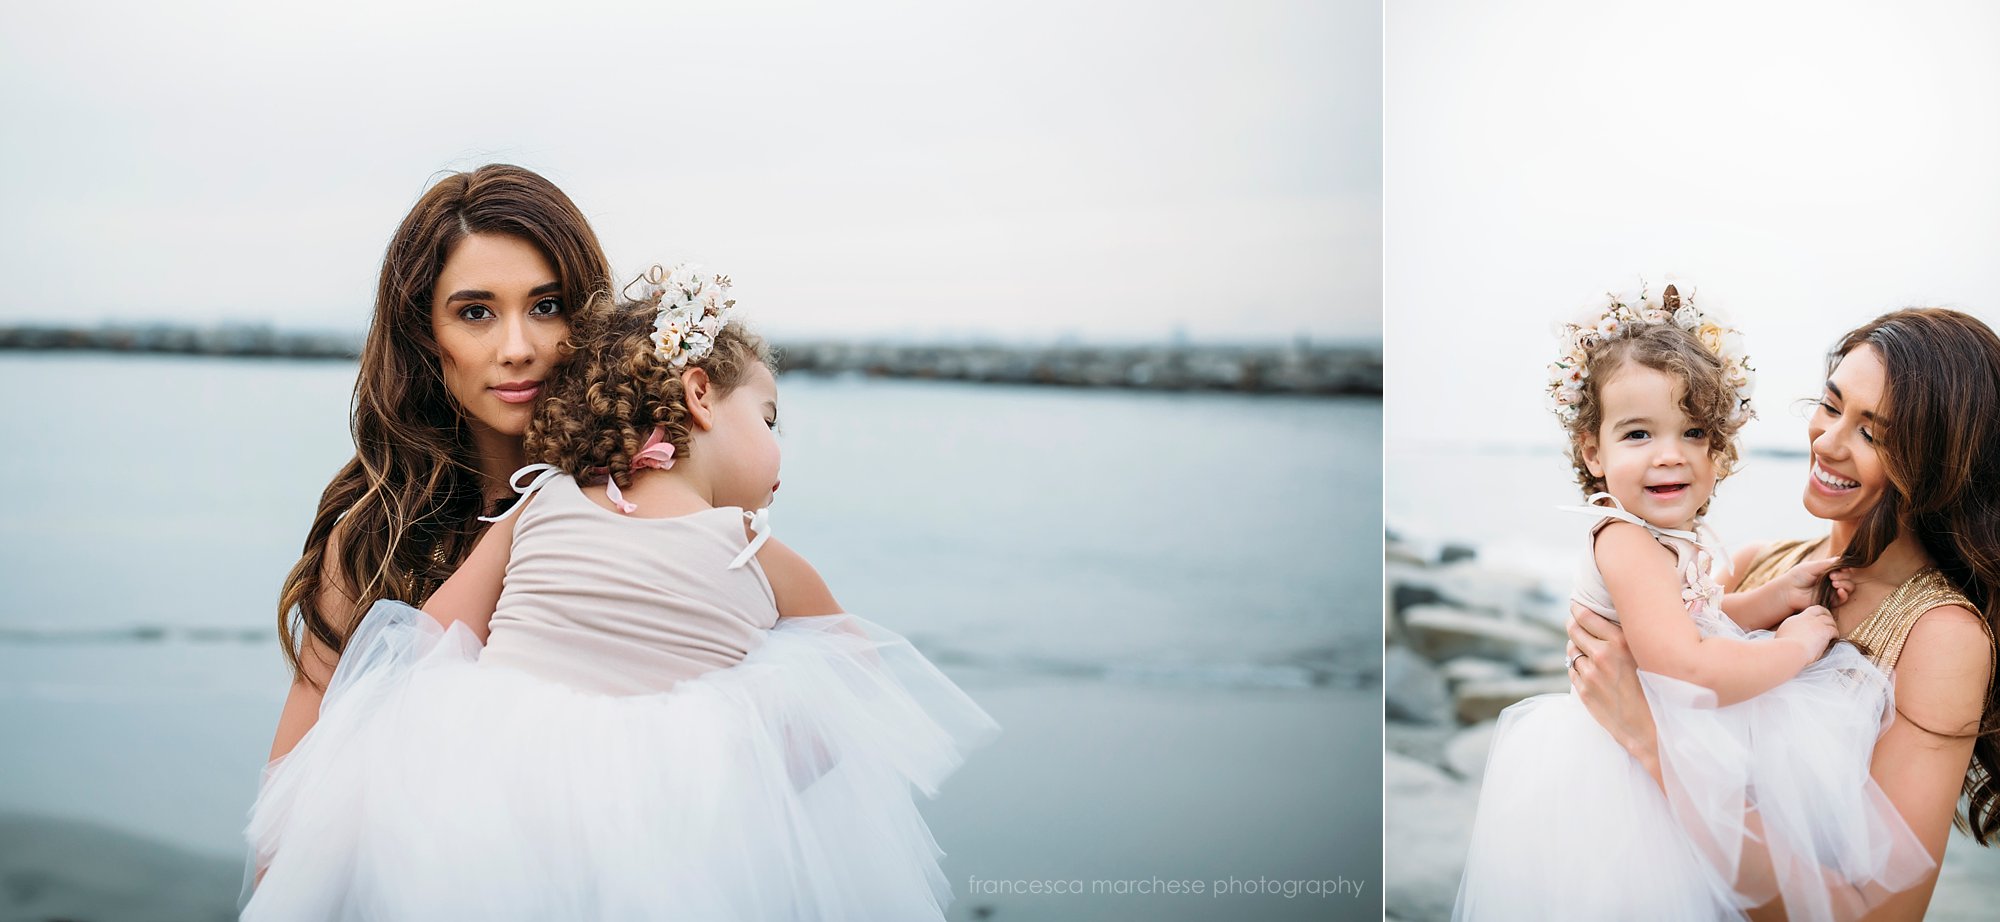 Francesca Marchese Photography - Family Photographer Starkman Family sunset beach session - mother and child